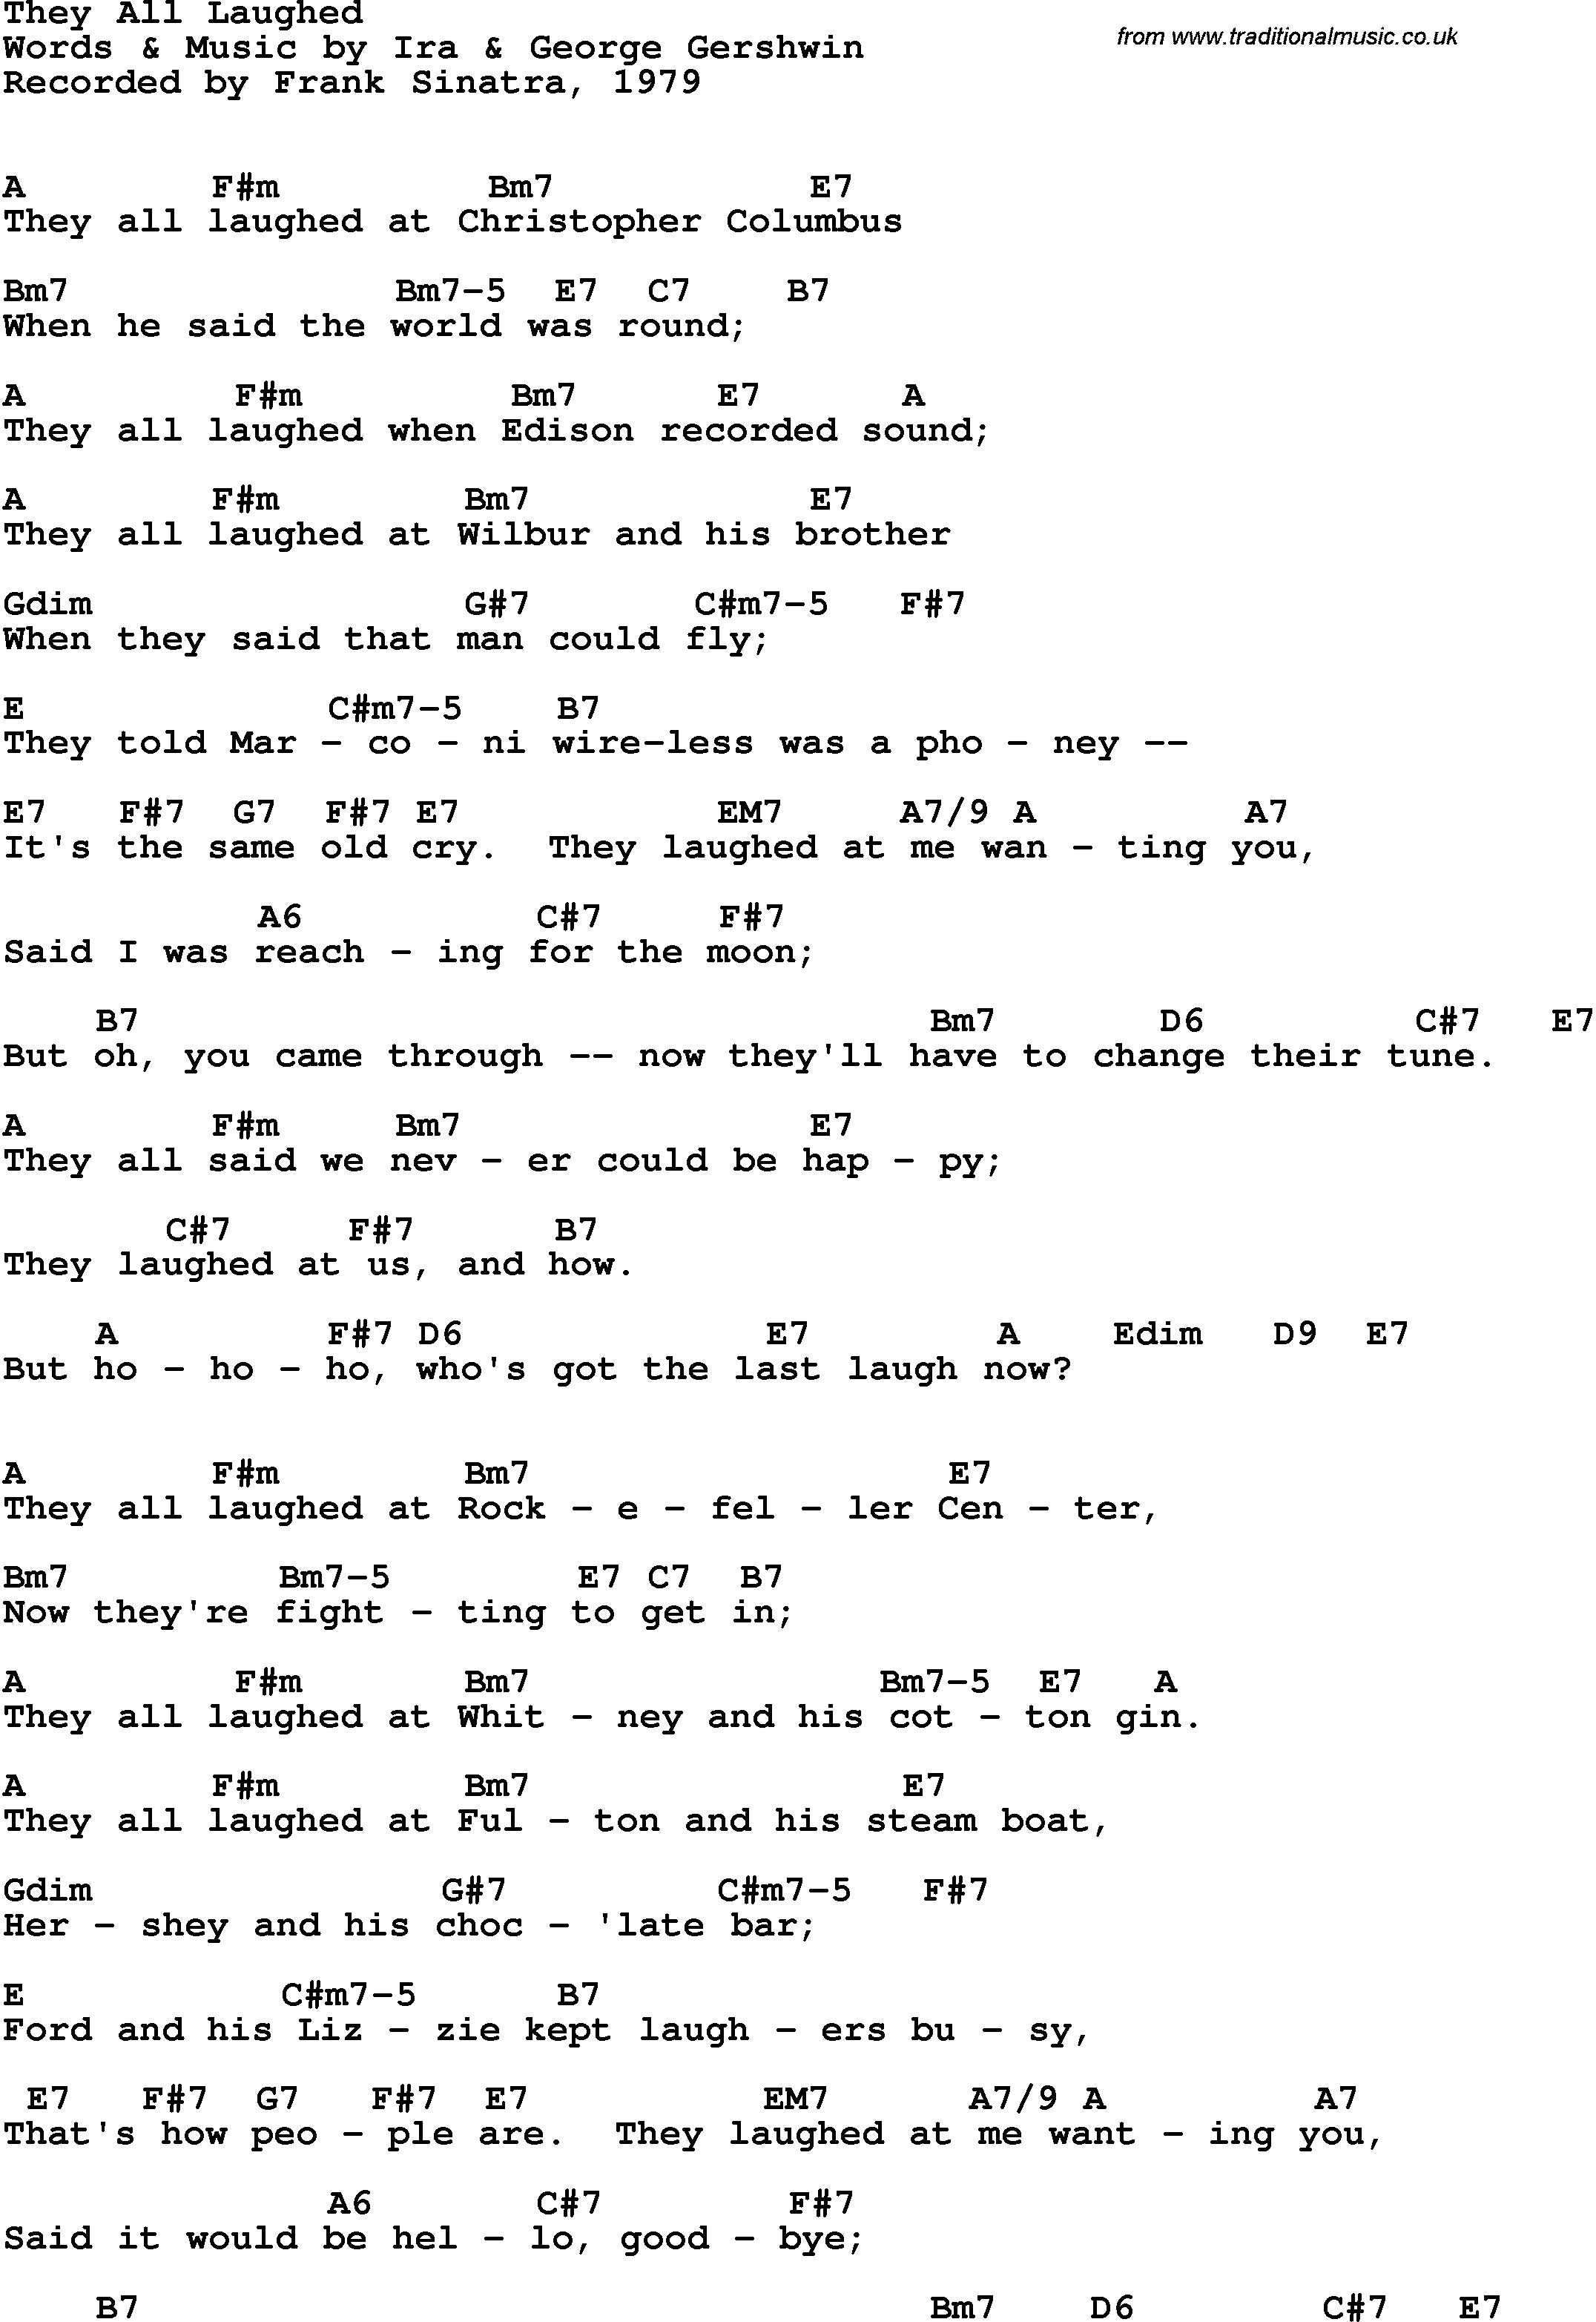 Song Lyrics with guitar chords for They All Laughted - Frank Sinatra, 1979